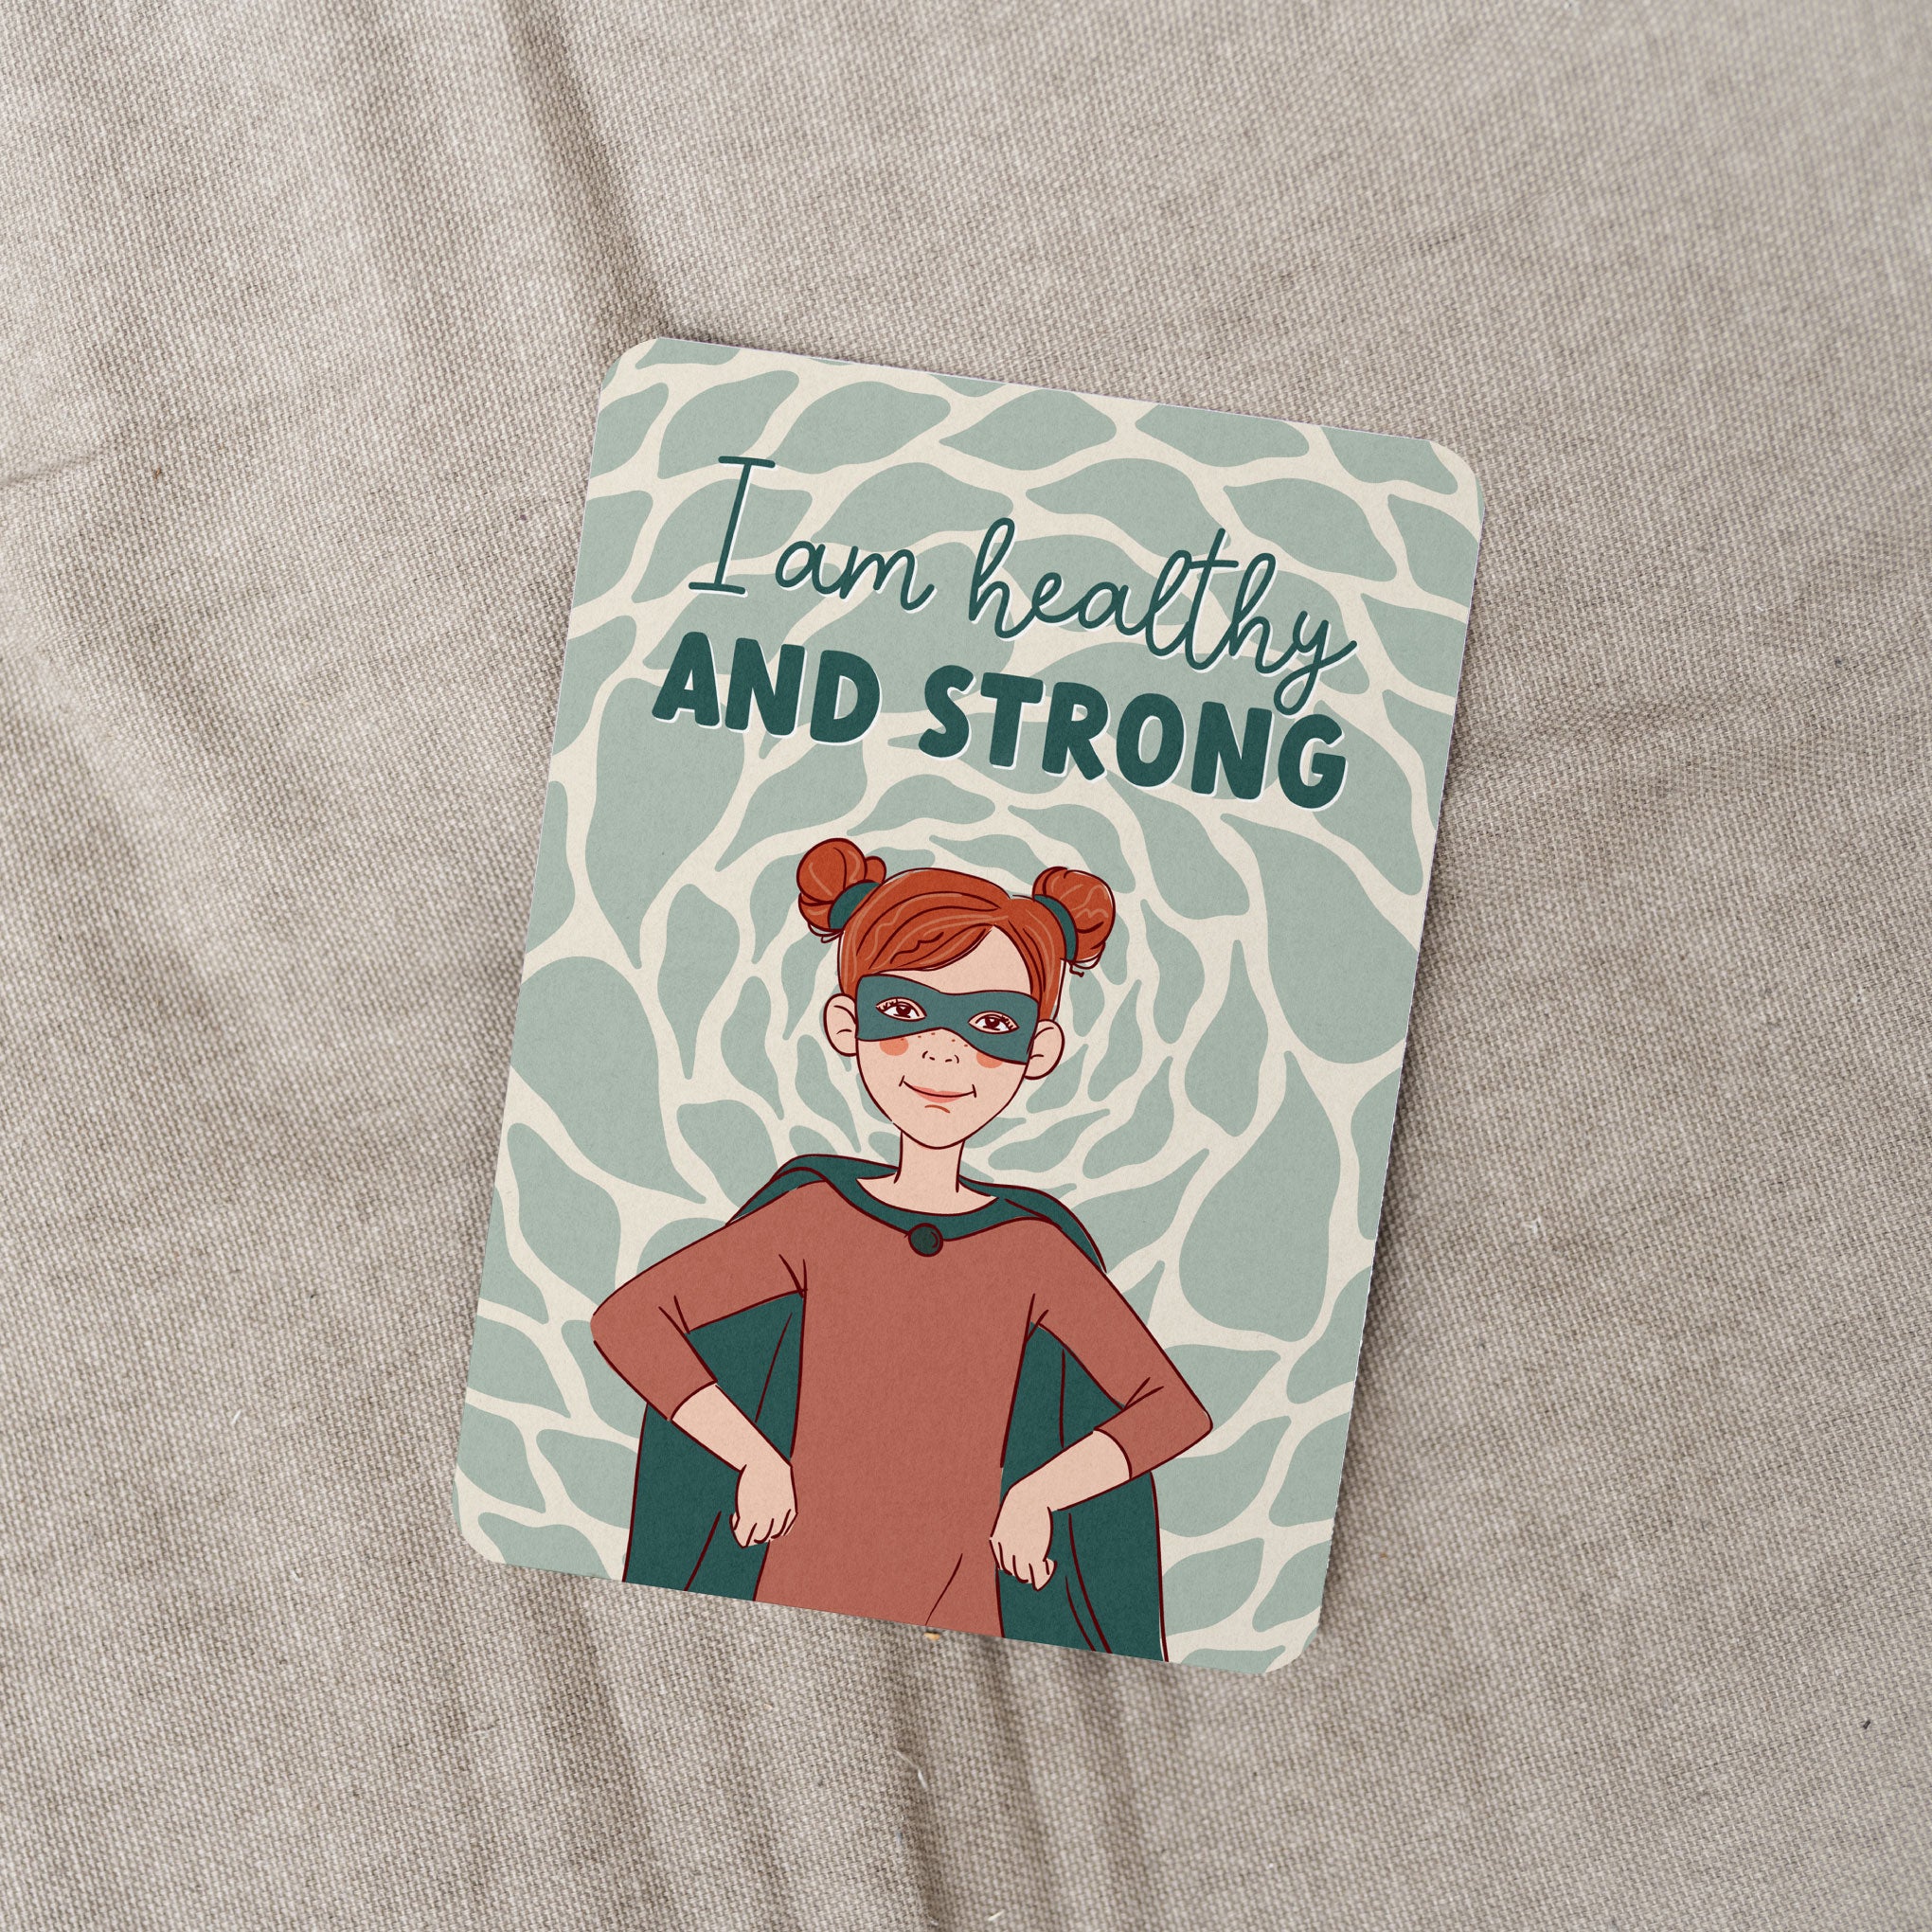 coping skills for kids - anxiety affirmation cards